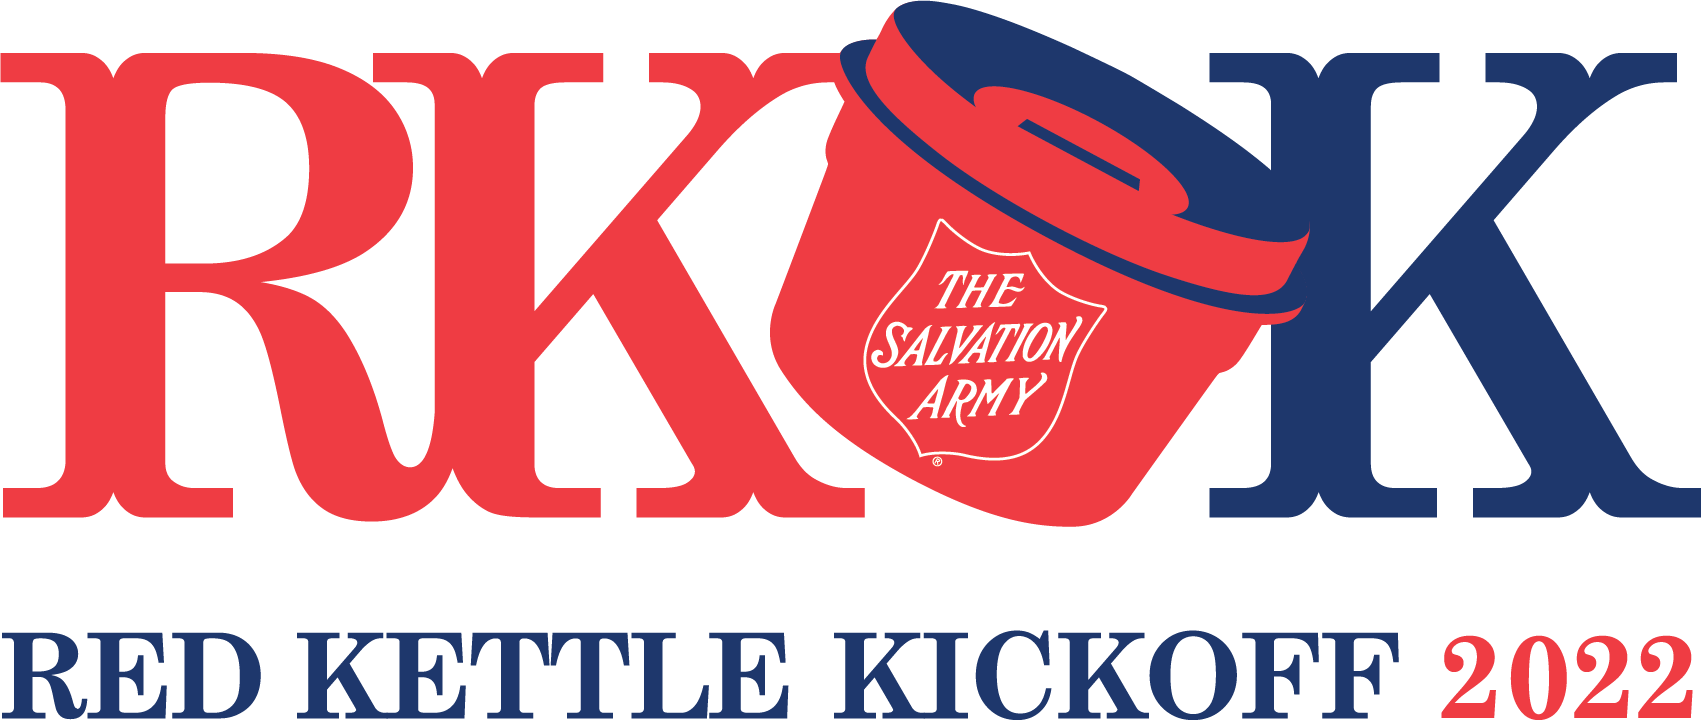 2022 Red Kettle Kickoff Festival Campaign